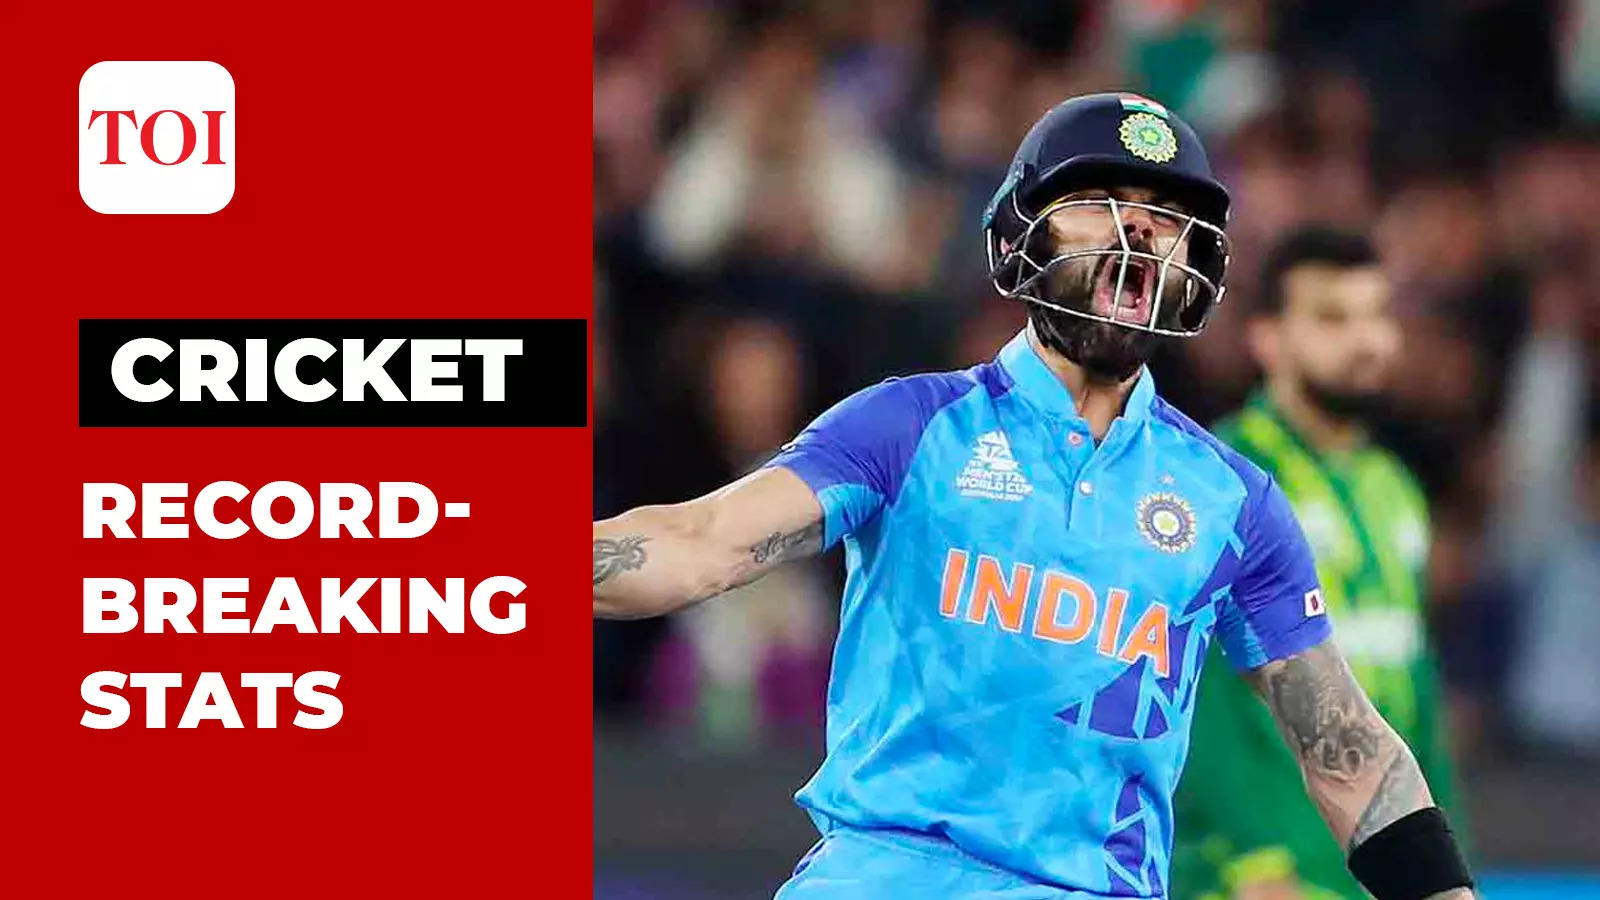 times-of-india-brings-the-latest-and-amp-top-breaking-news-on-politics-and-current-affairs-in-india-and-amp-around-the-world-cricket-sports-business-bollywood-news-and-entertainment-science-technology-health-and-amp-fitness-news-and-amp-opinions-from-leading-columnists